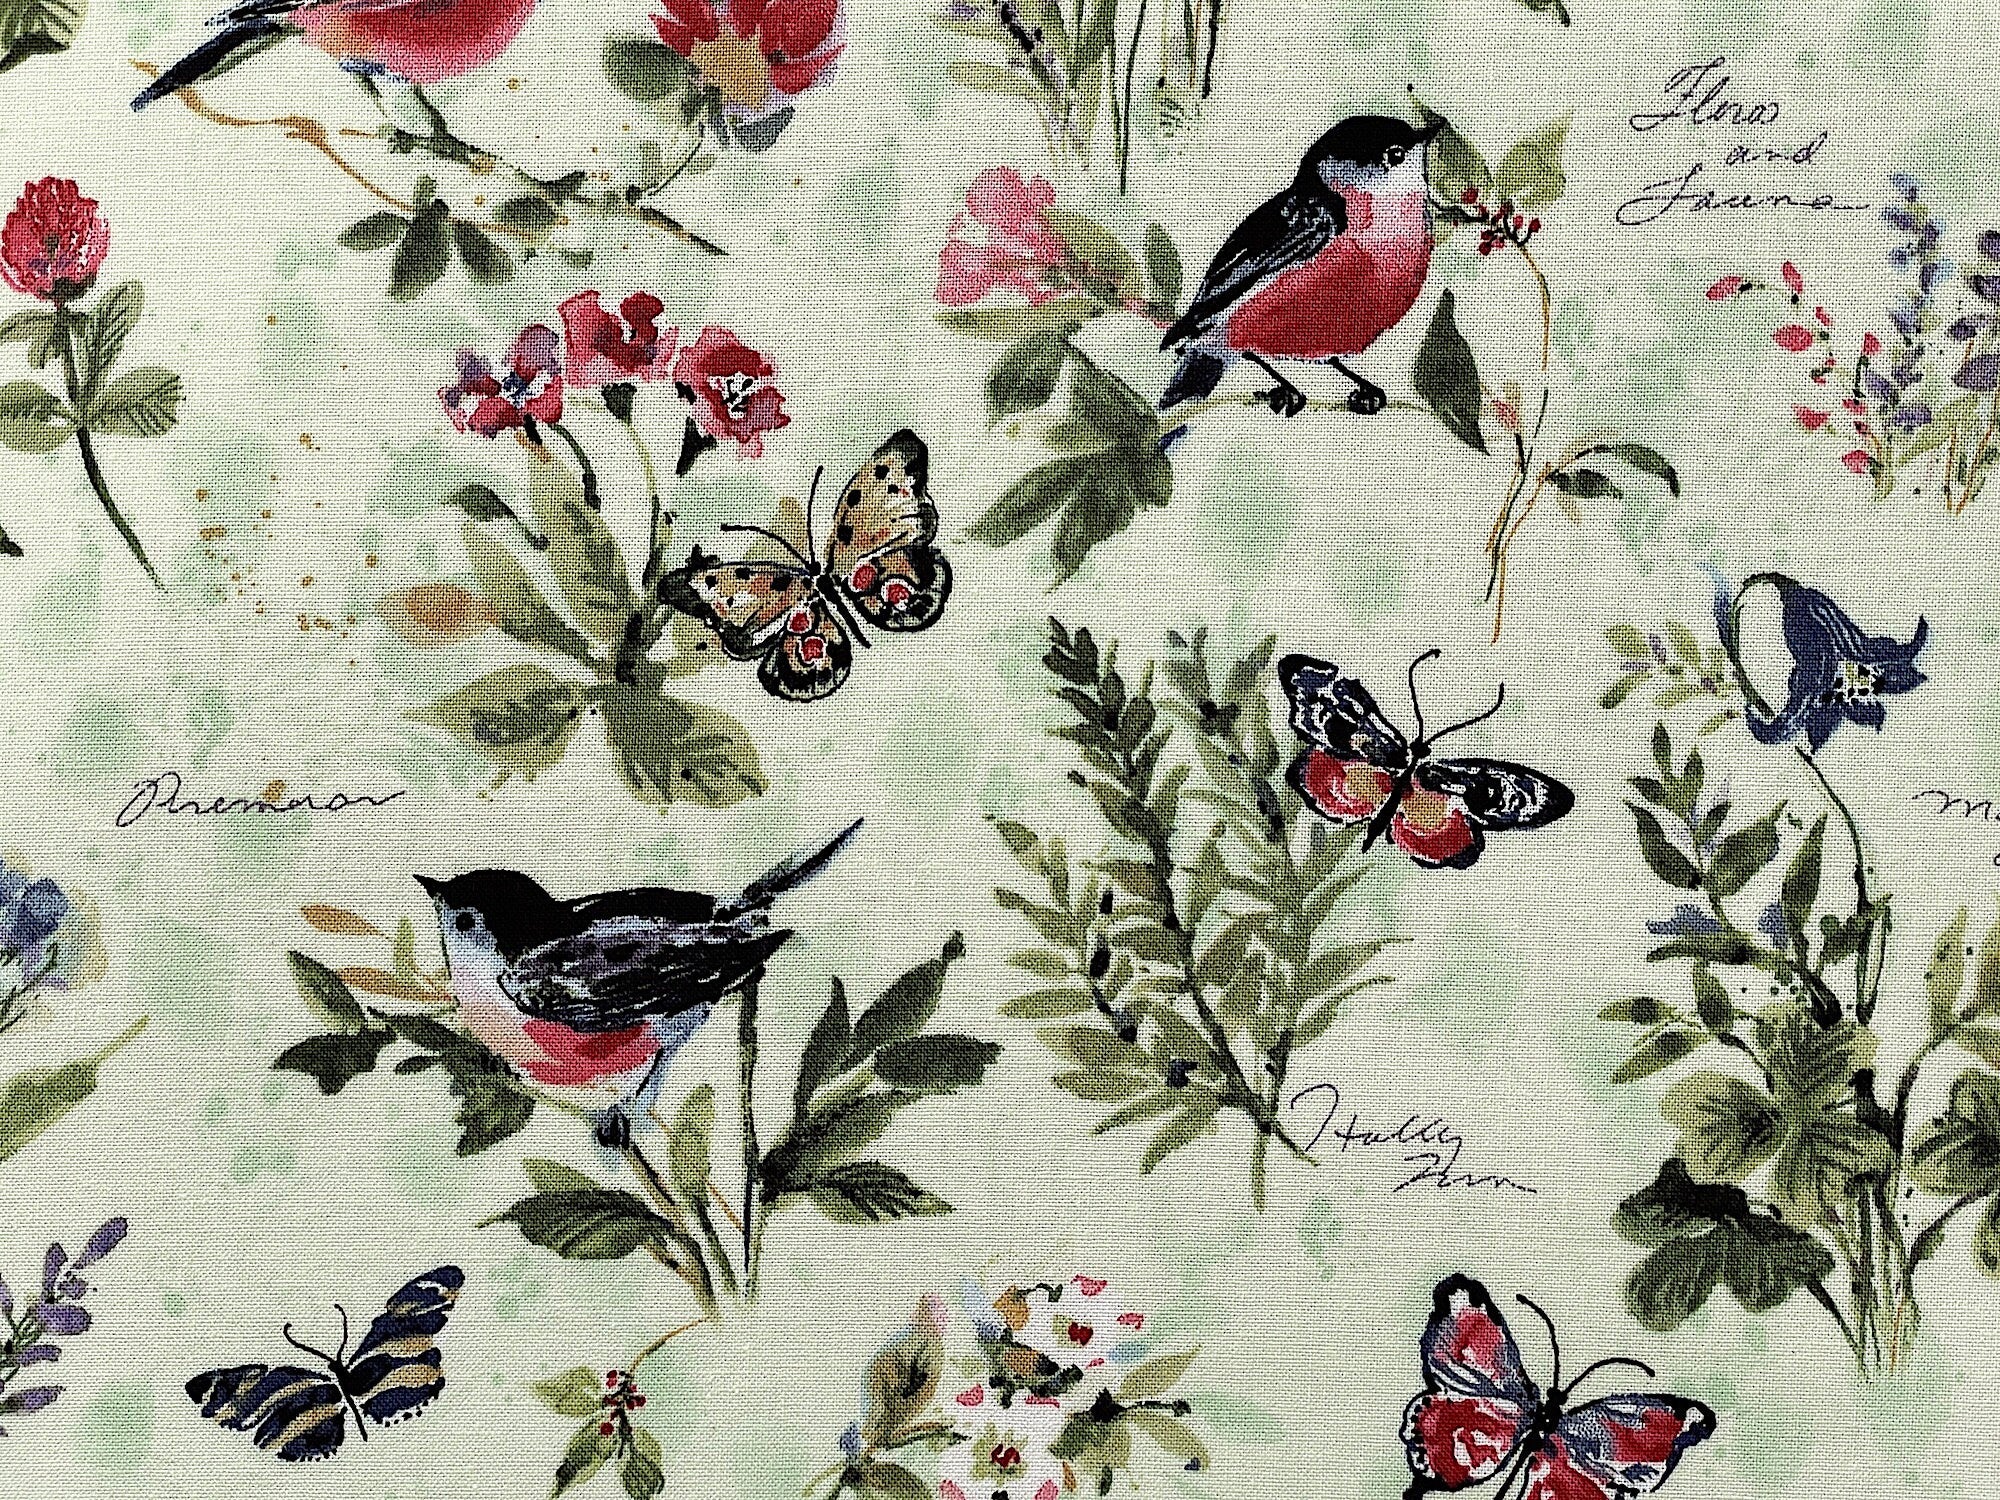 Close up of butterflies, birds and flowers.